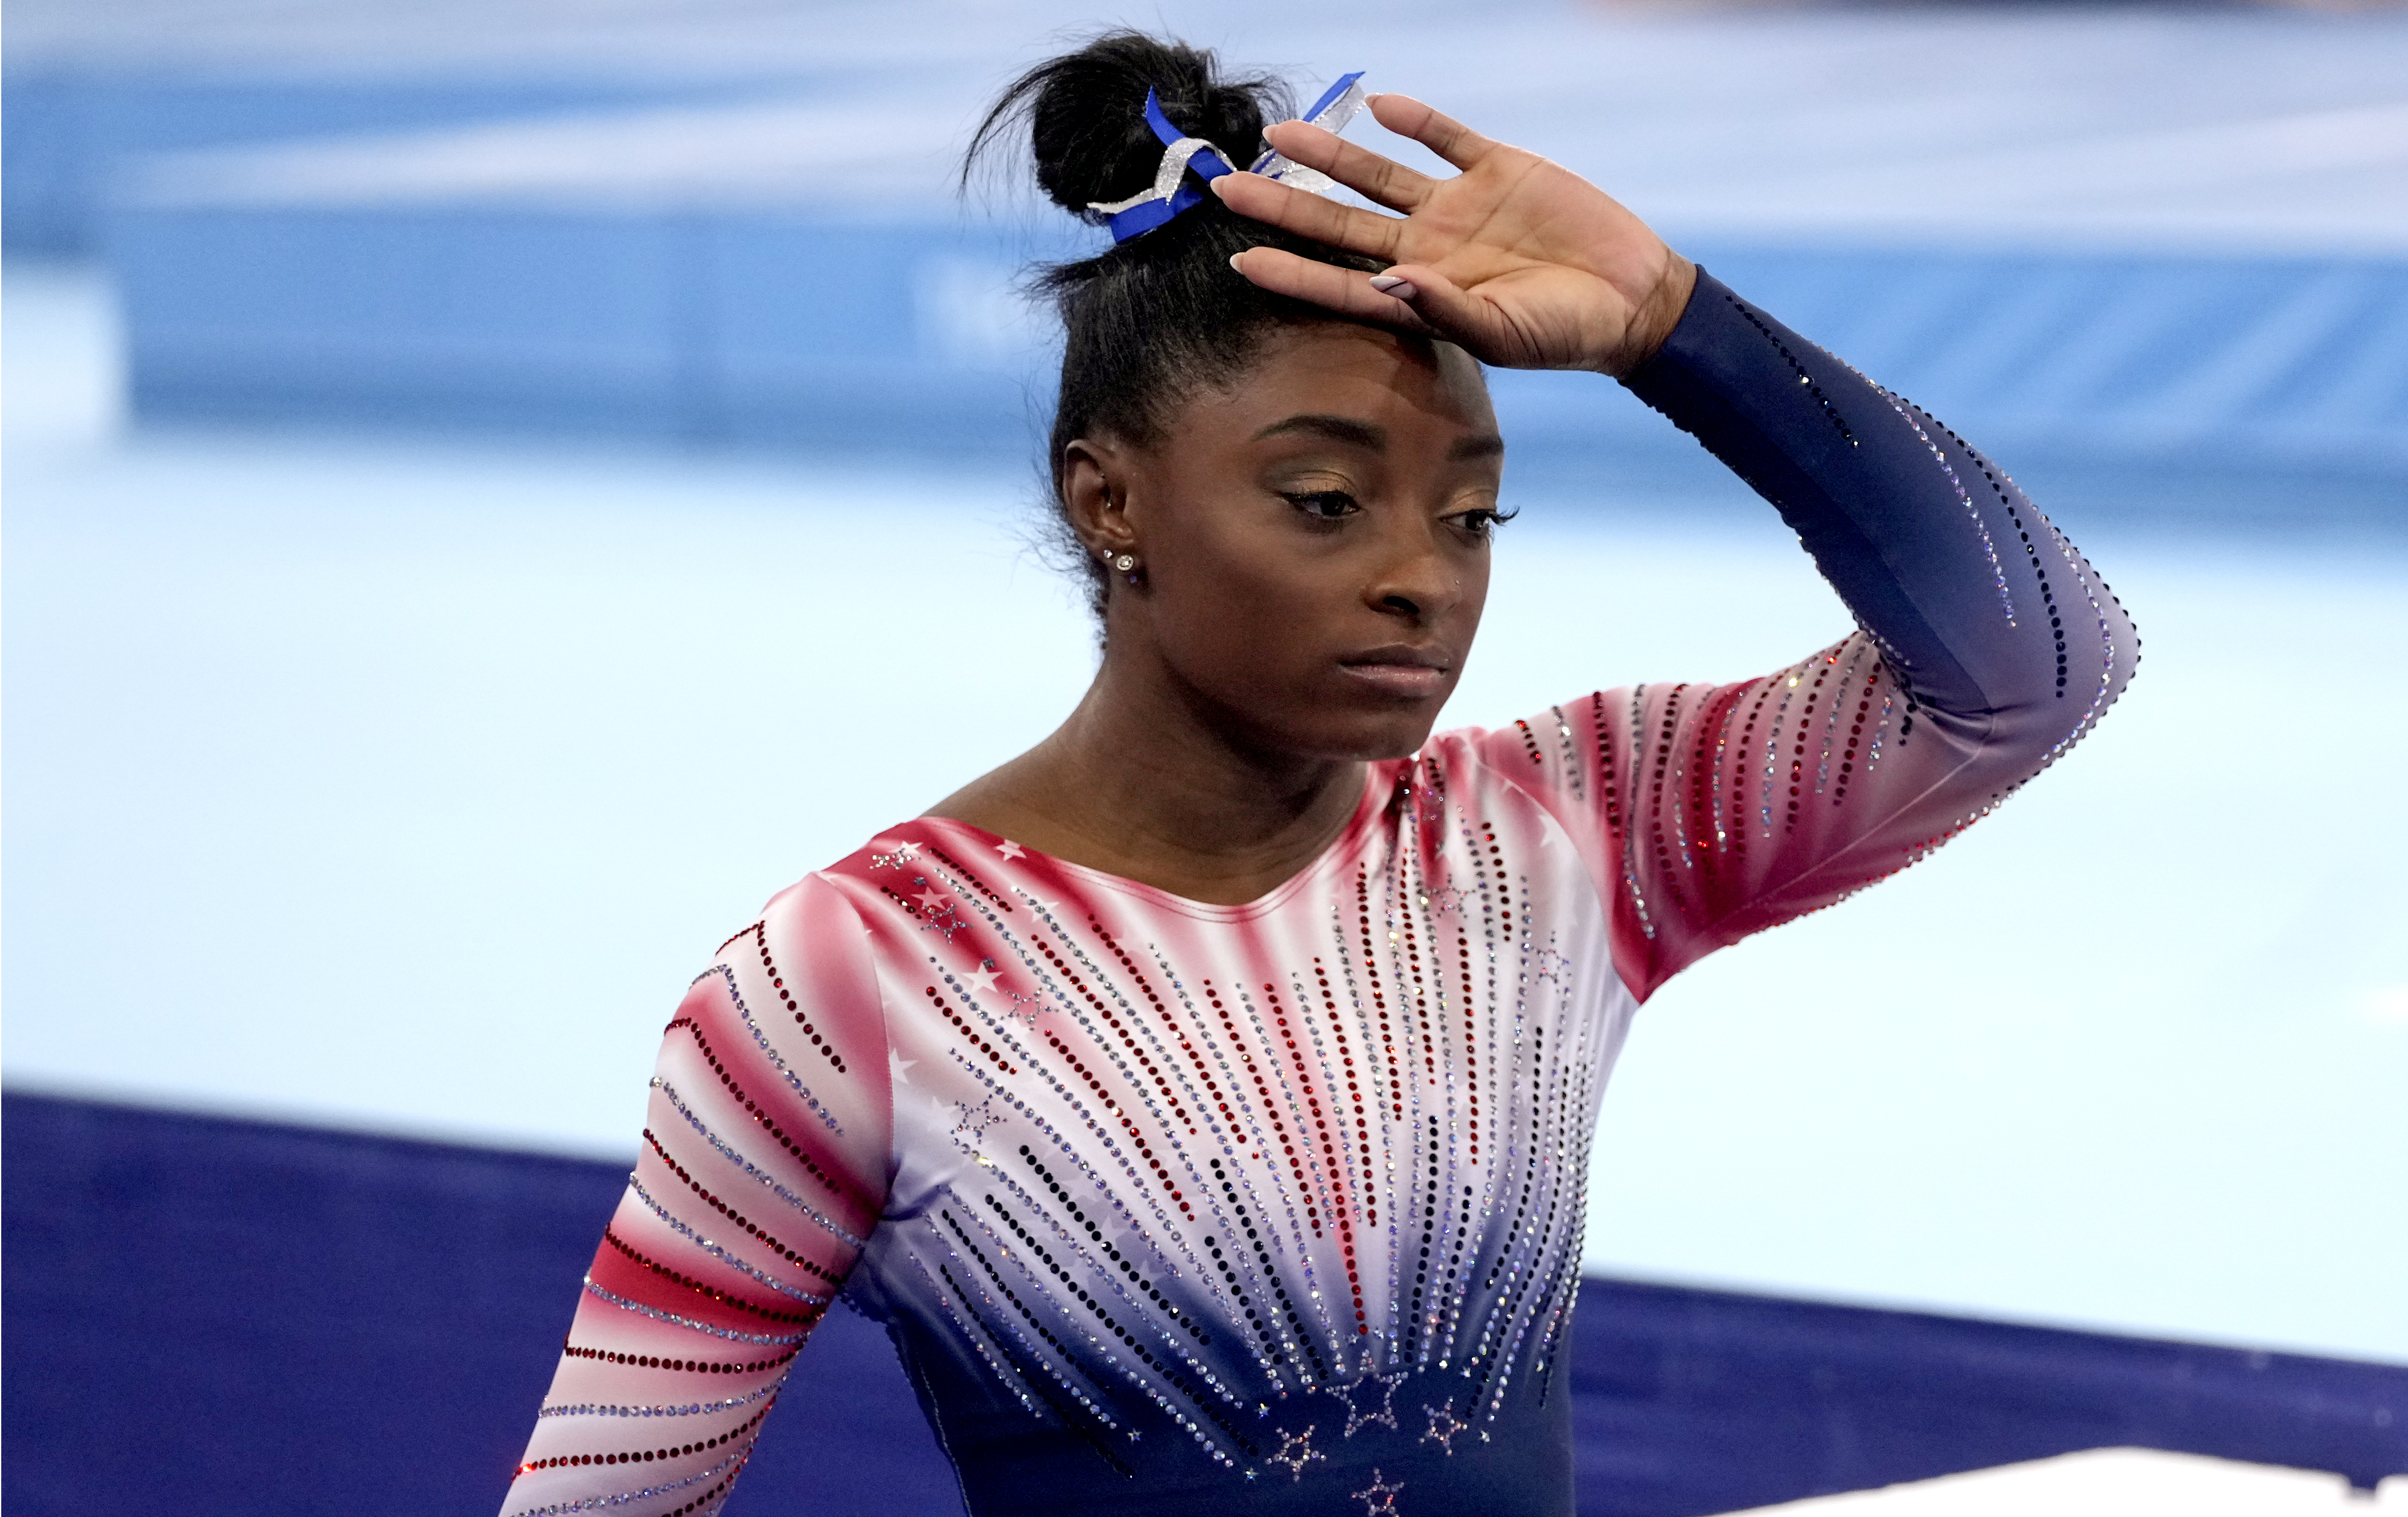 Simone Biles of Team United States gets ready to compete in the Tokyo 2020 Olympic Games Women's Gymnastics Balance Beam Final at Ariake Gymnastics Center on Tuesday, August 3, 2021. | Source: Getty Images